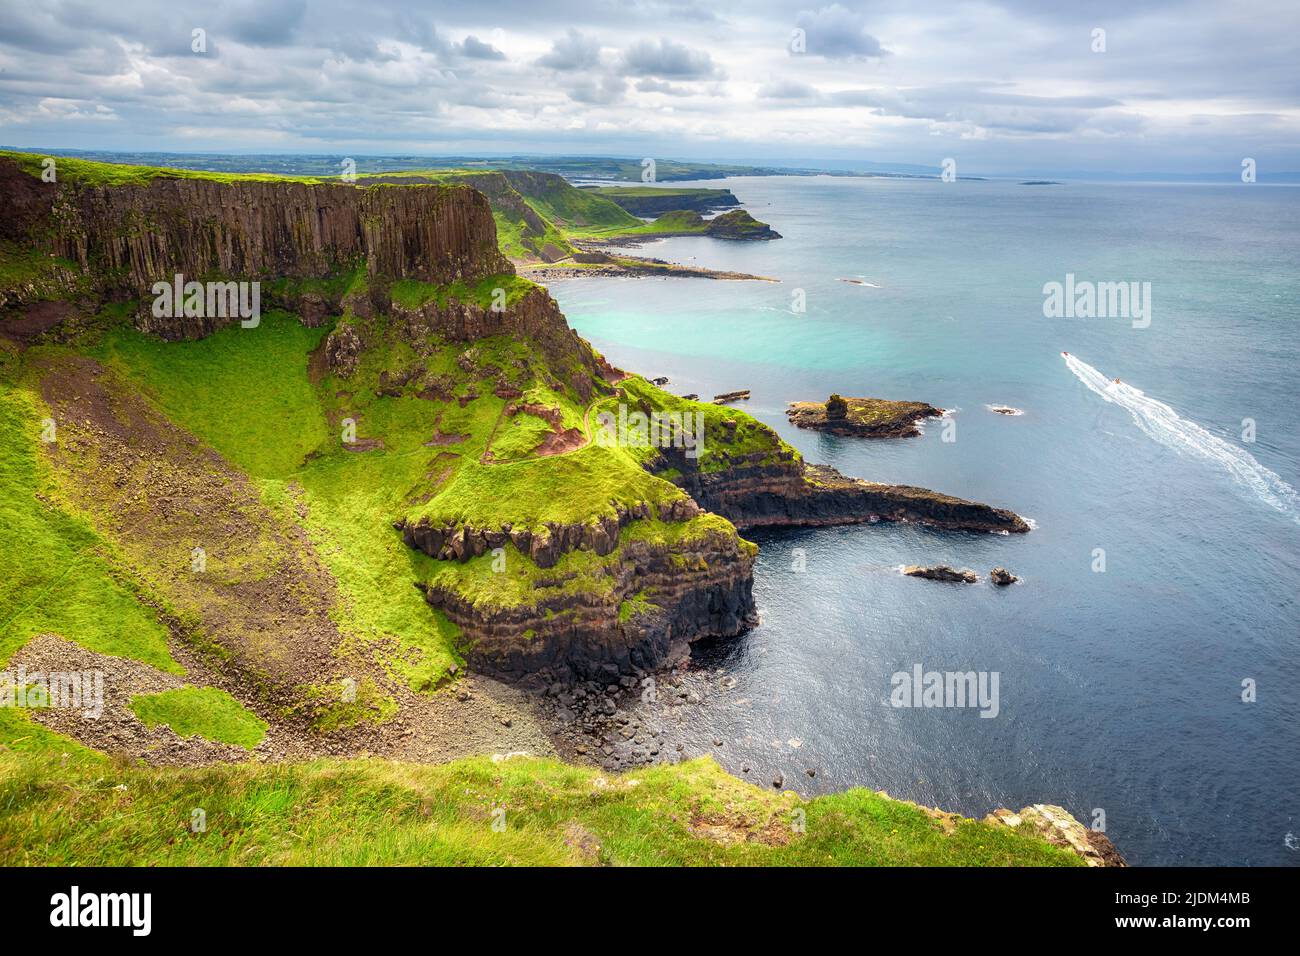 The Amphitheatre, Port Reostan Bay and Giant's Causeway on background, County Antrim, Northern Ireland, UK Stock Photo